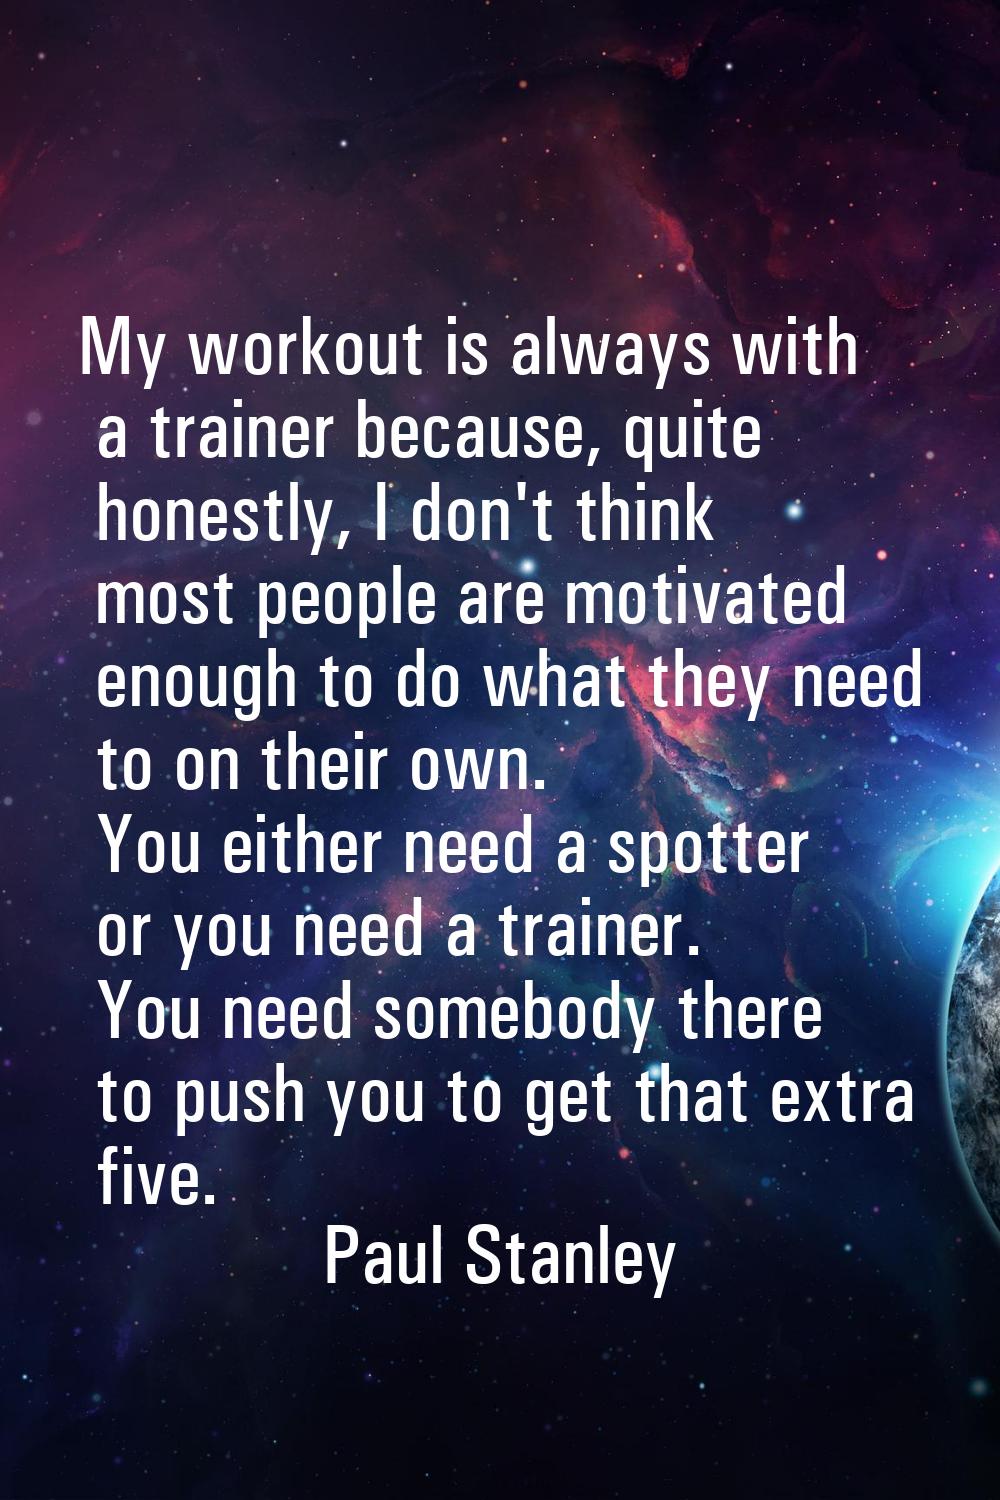 My workout is always with a trainer because, quite honestly, I don't think most people are motivate